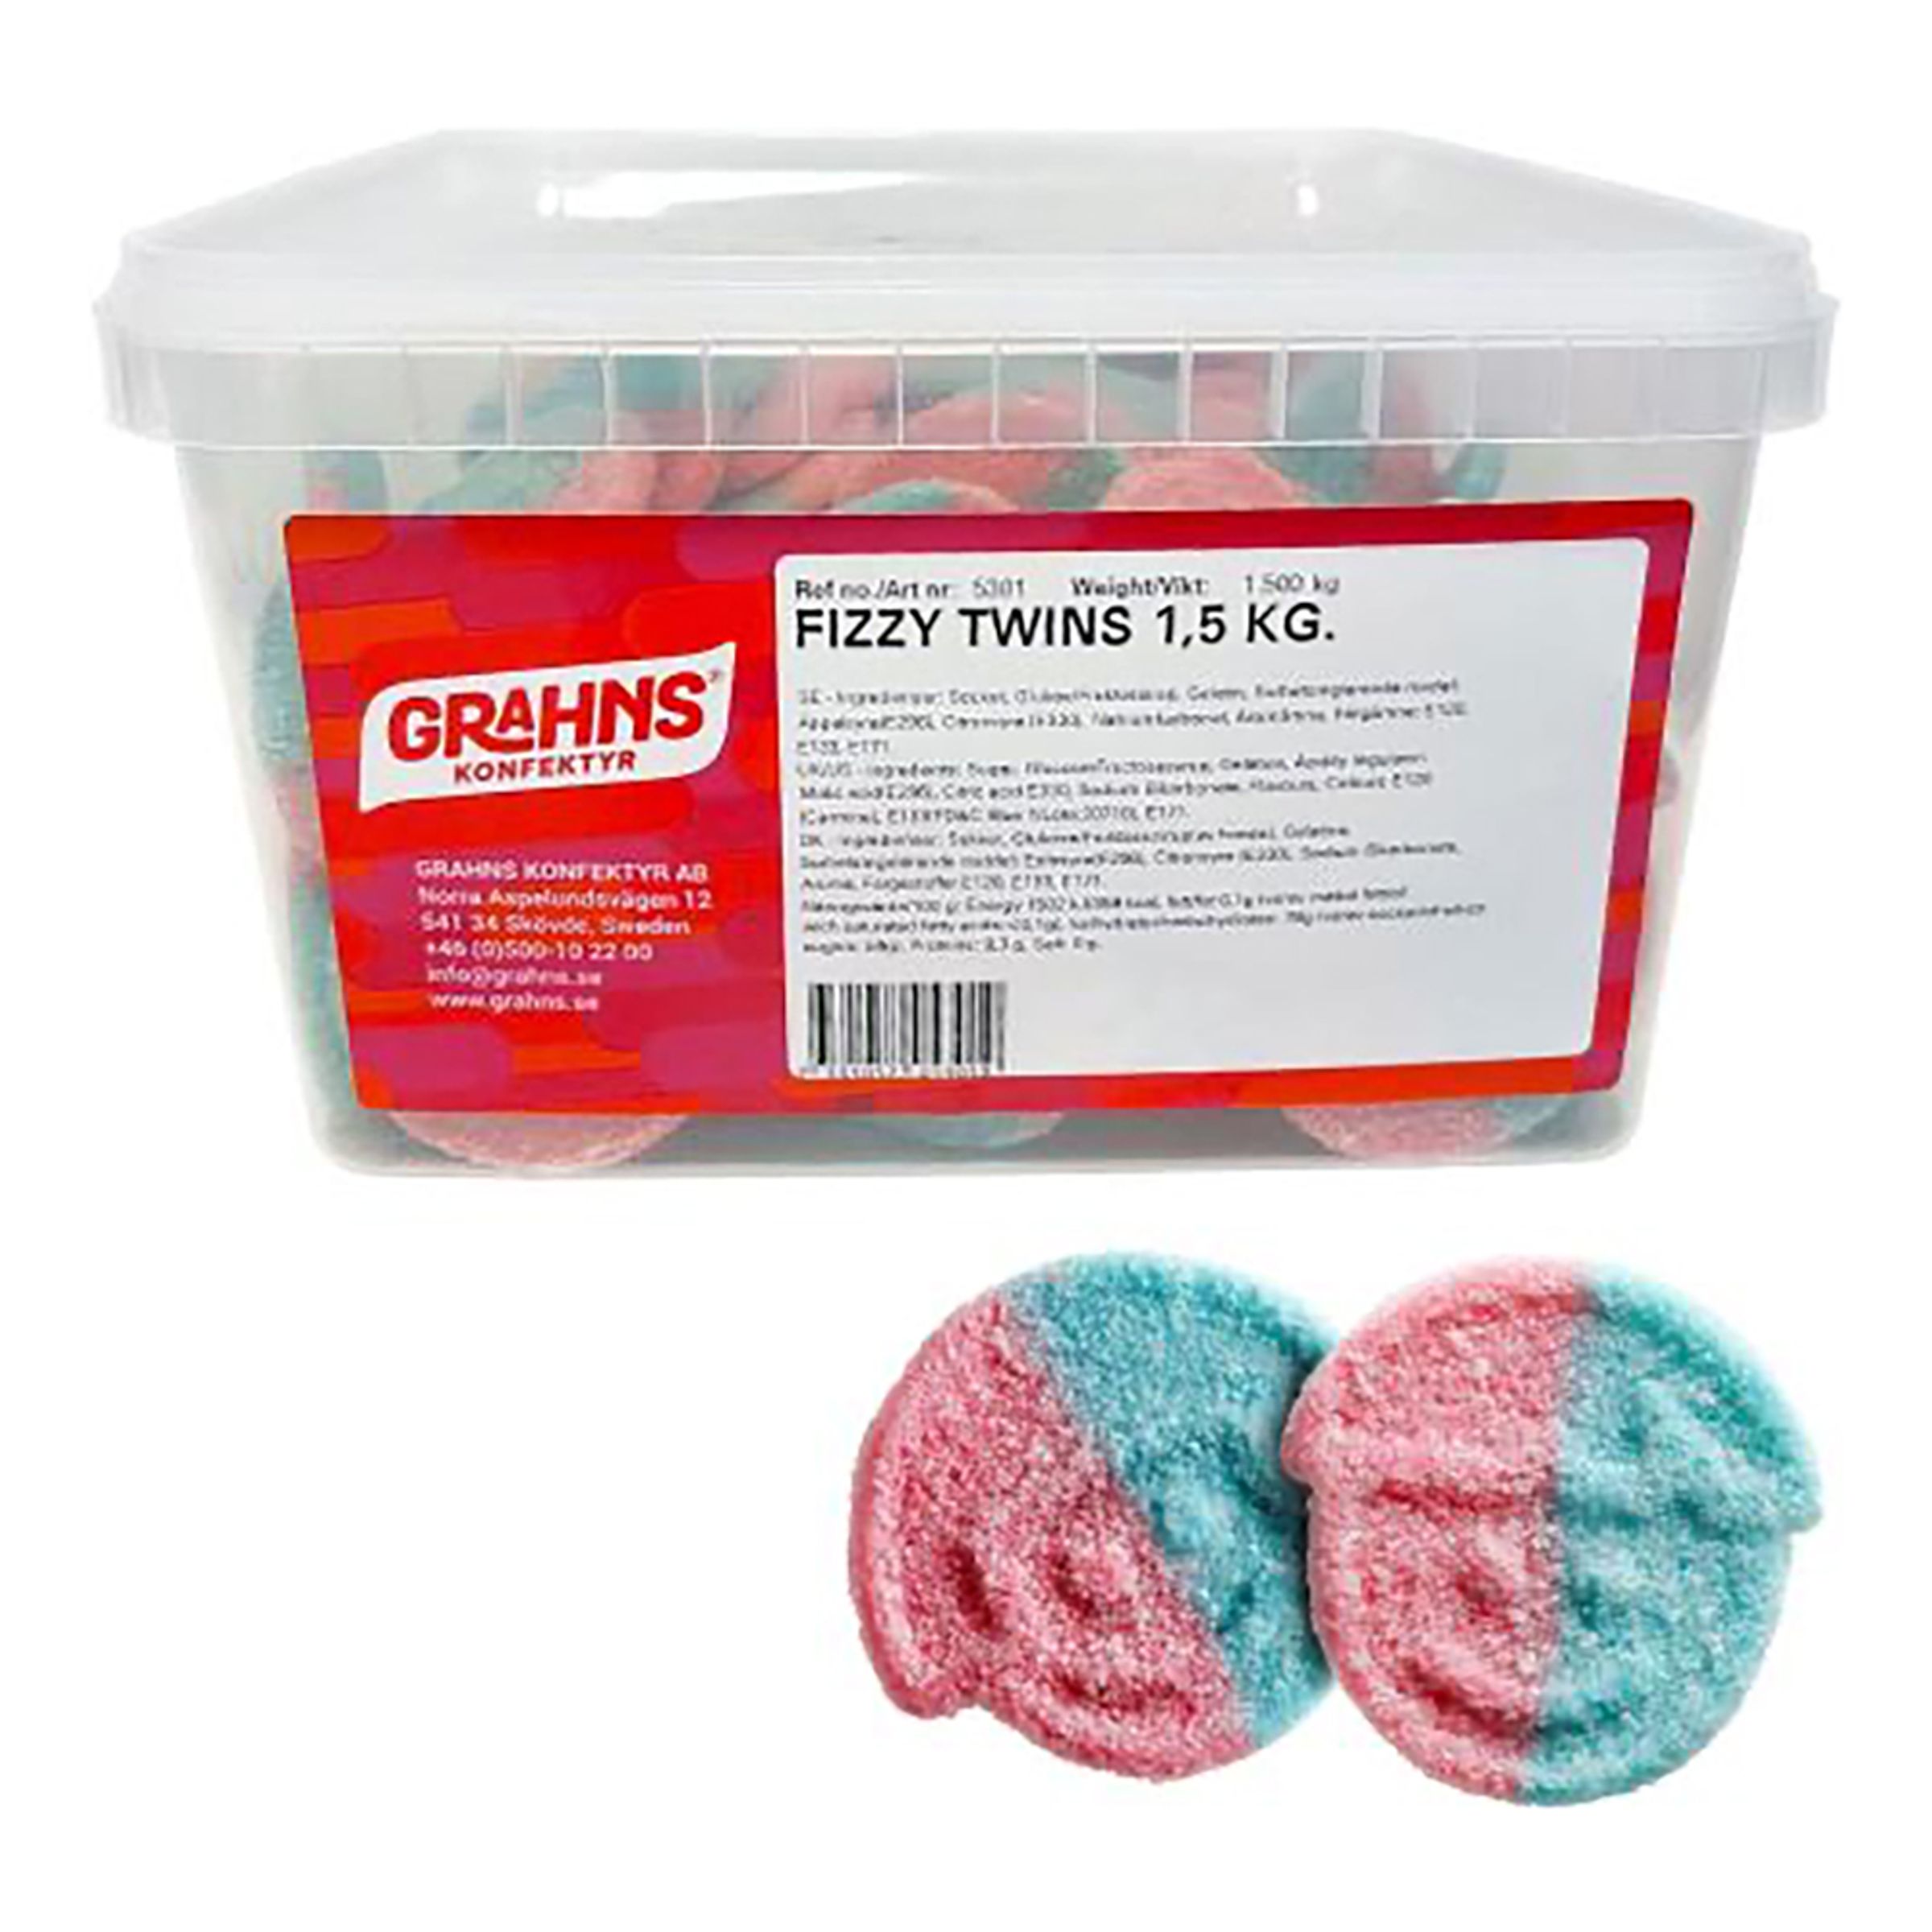 Fizzy Twins Storpack - 1,5 kg